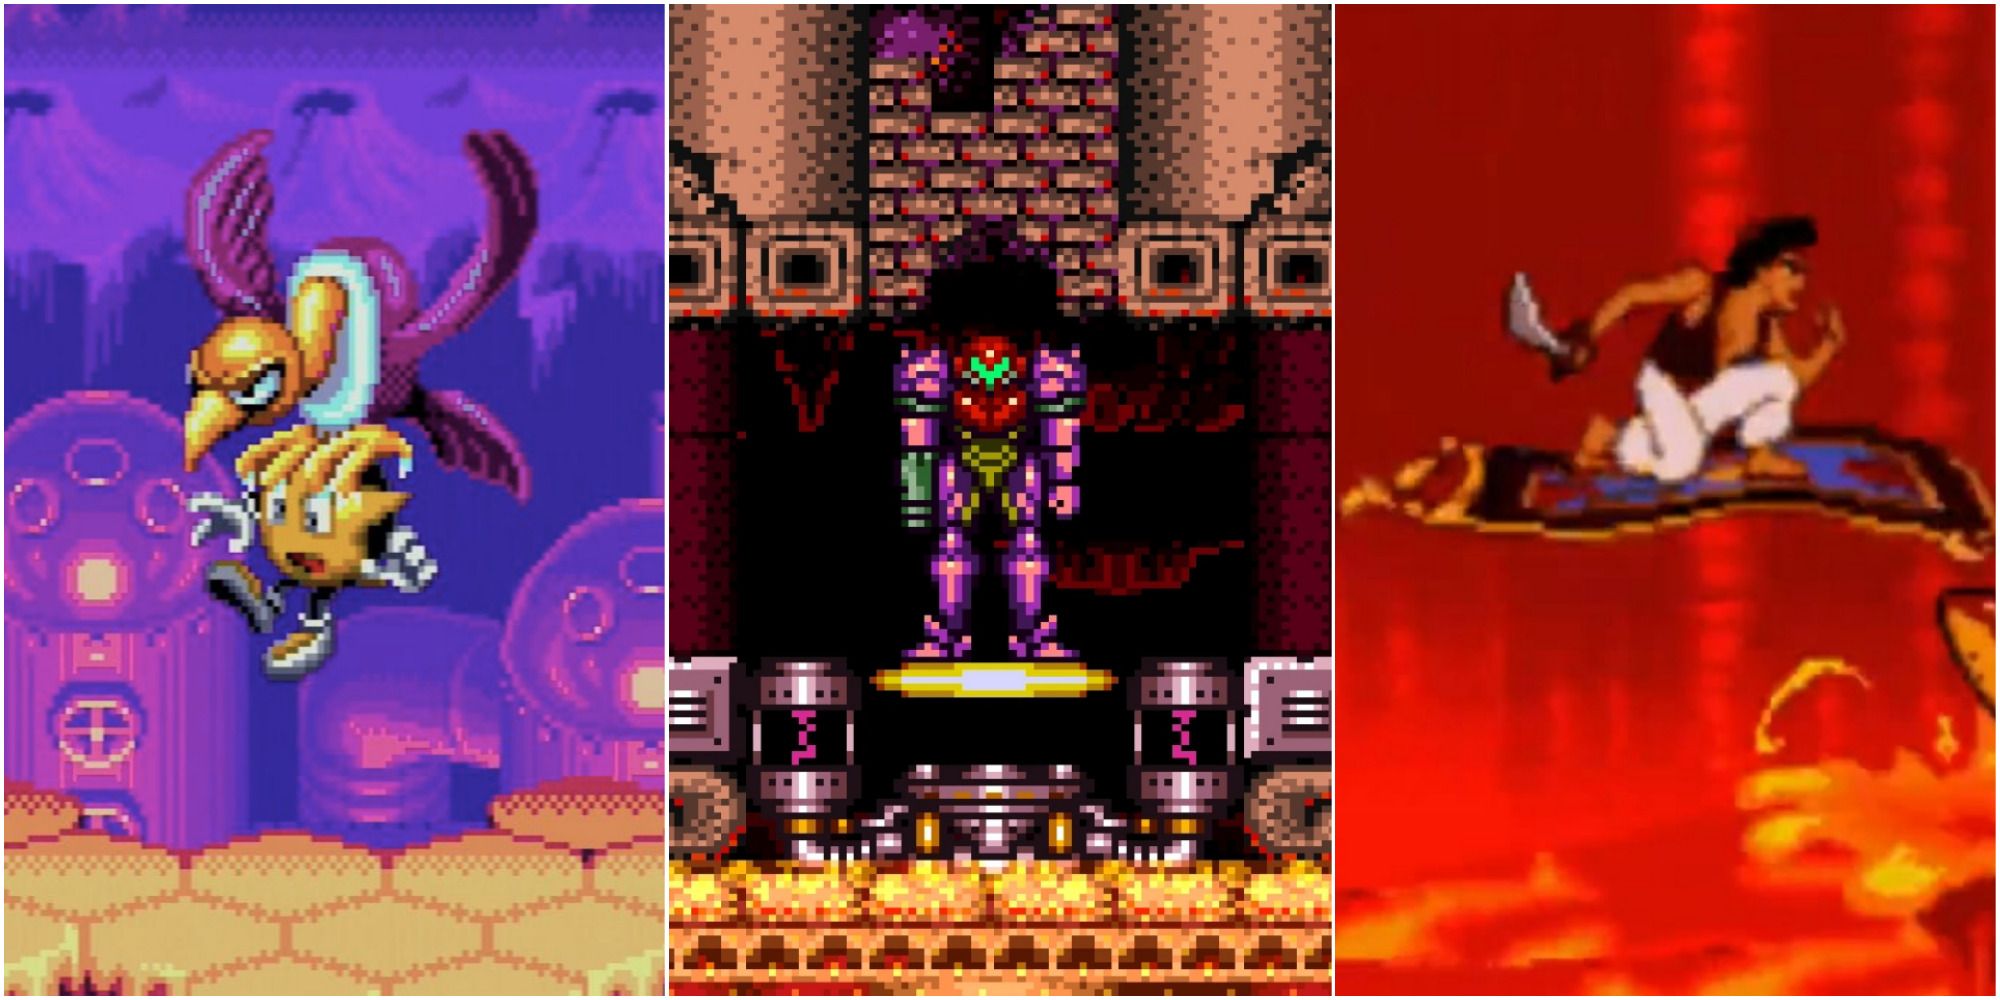 A collage of images of Ristar, Super Metroid, and Aladdin